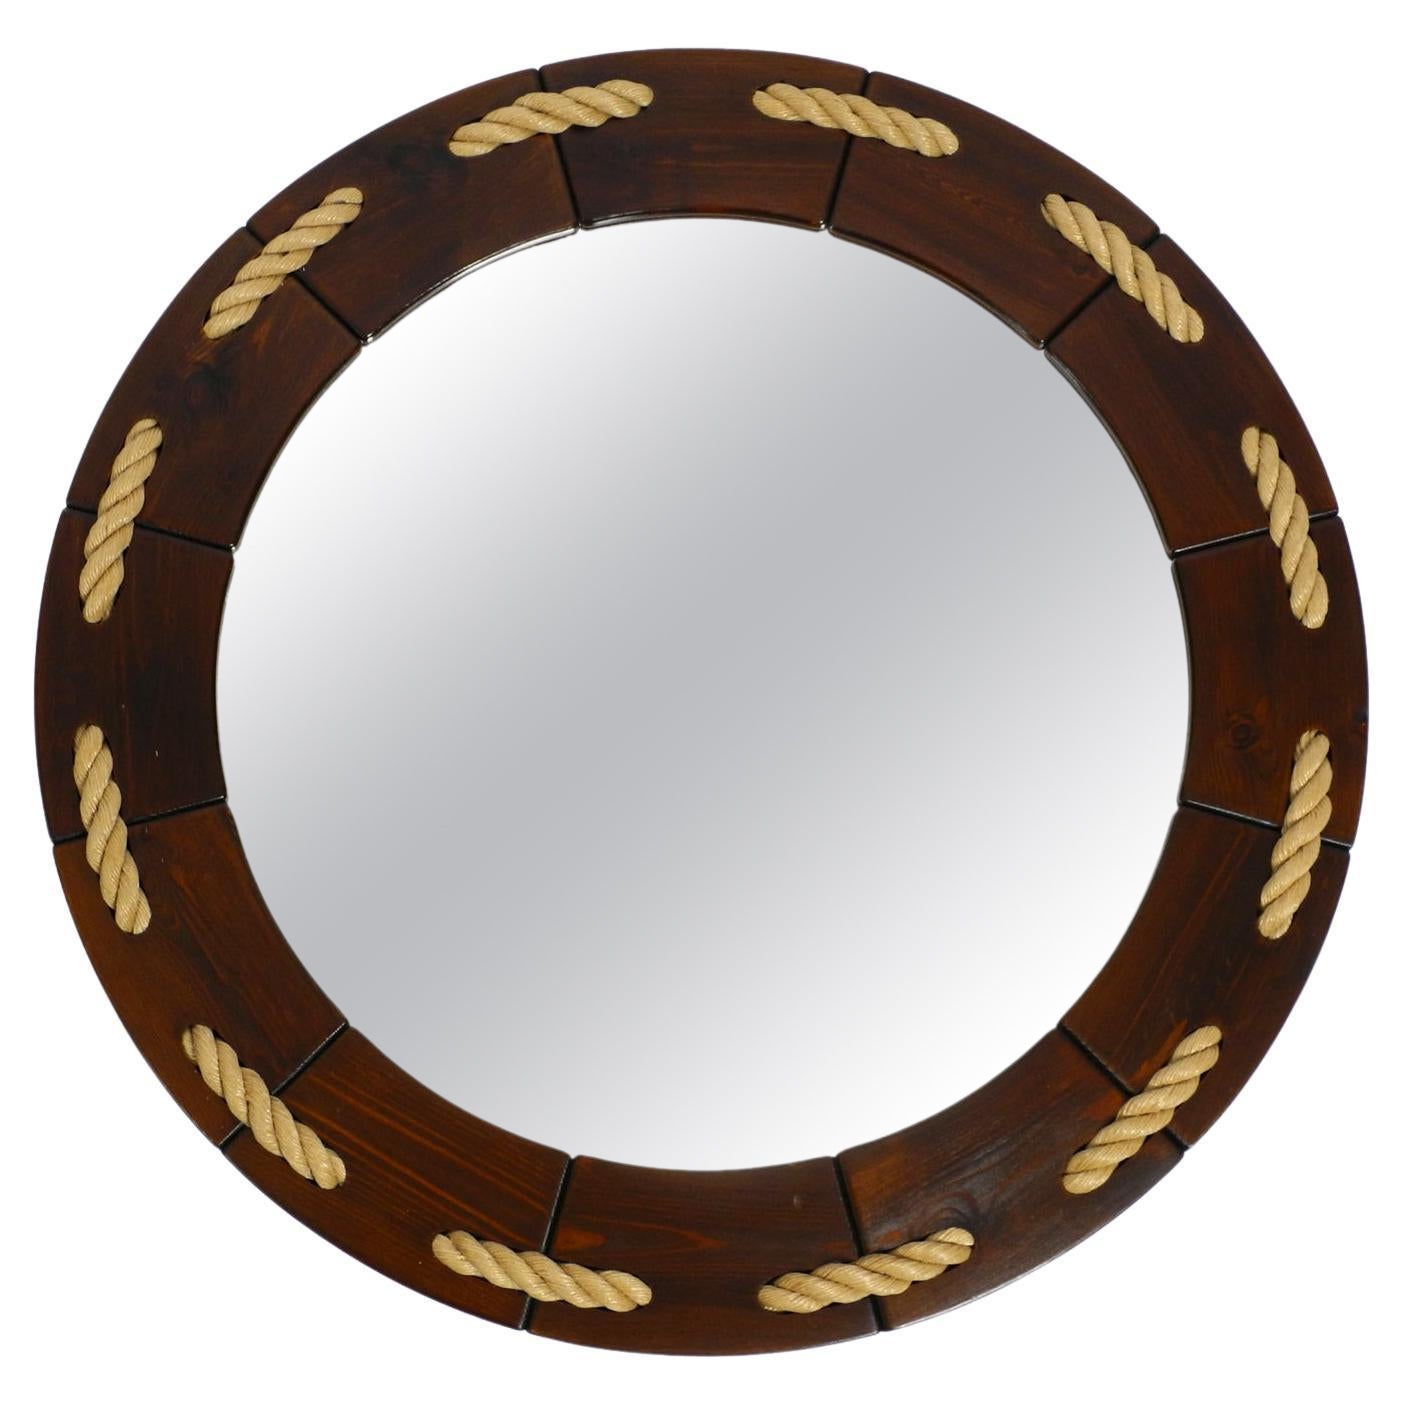 Huge 1970s Maritime Round Pine Wood Wall Mirror from Denmark For Sale